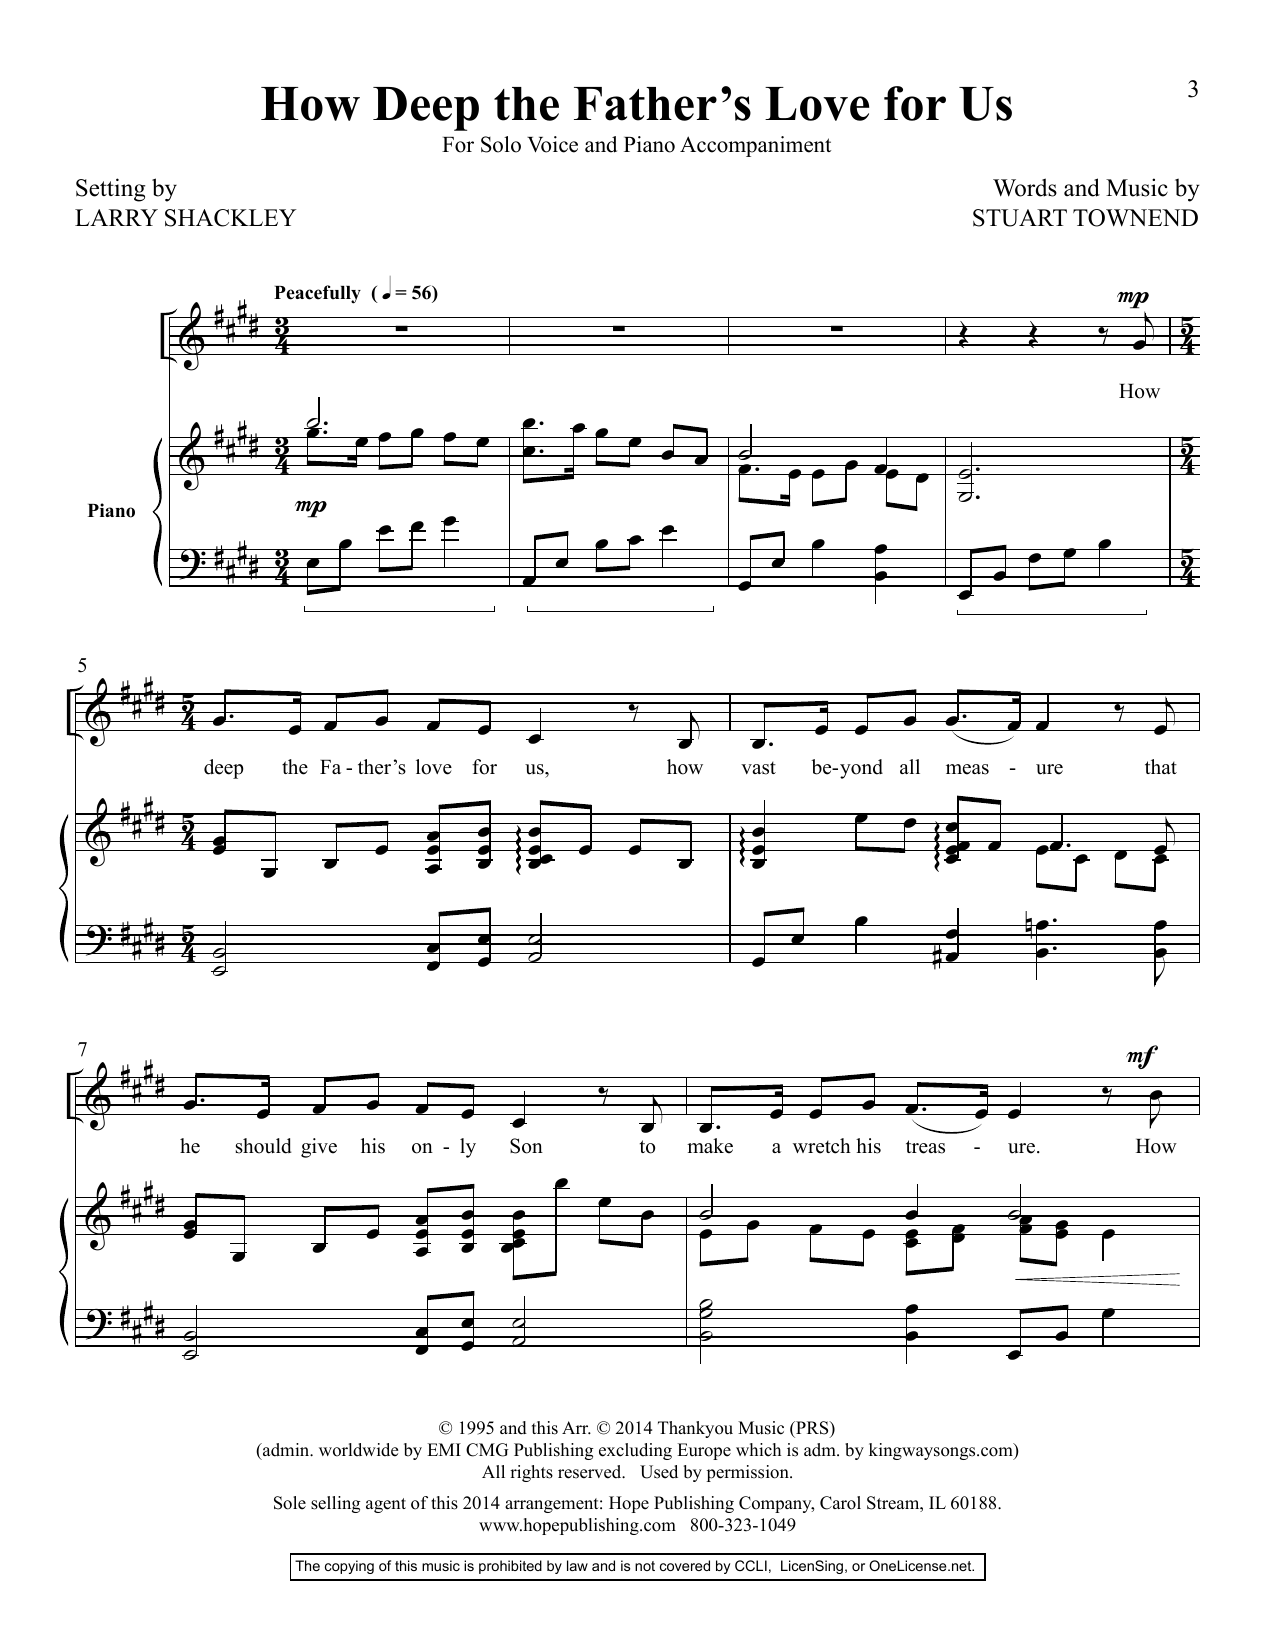 Download Larry Shackley How Deep the Father's Love for Us Sheet Music